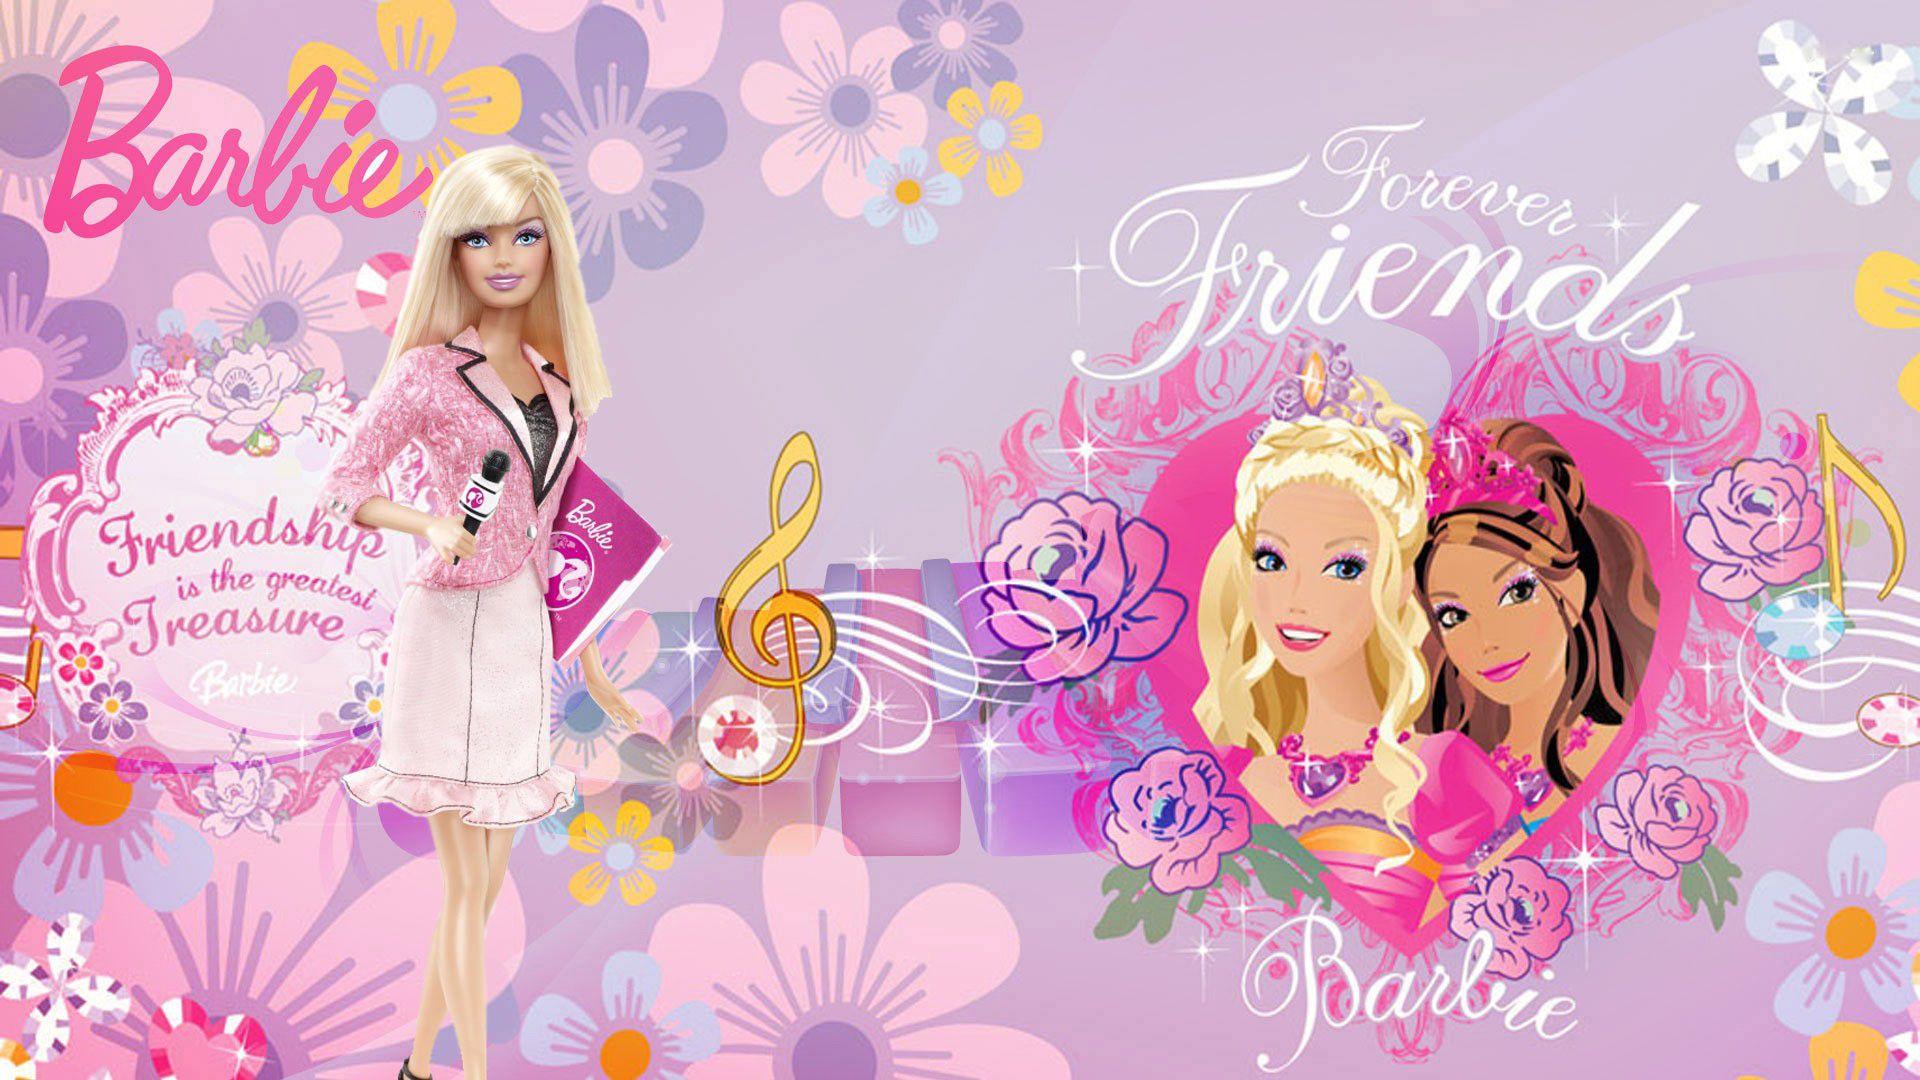 Barbie Doll Wallpaper For Mobile Free Download